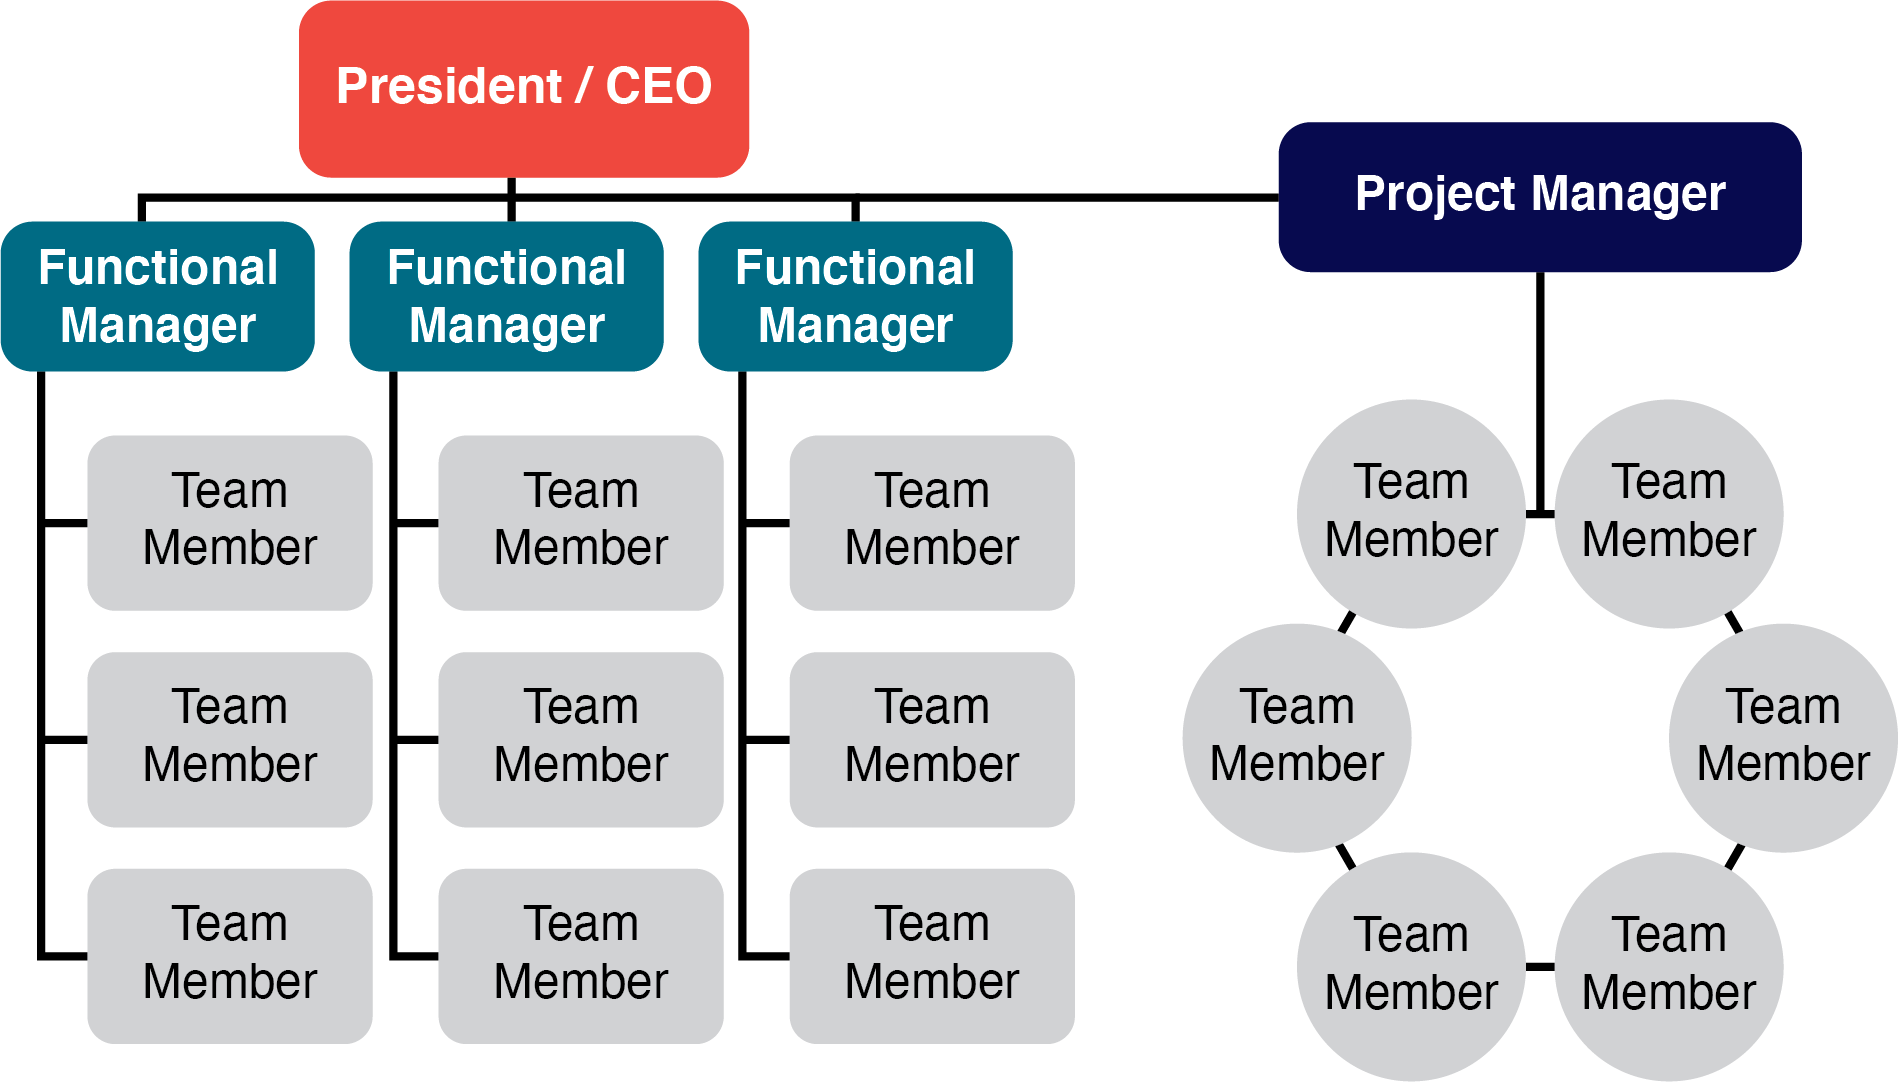 Dedicated Project Team as explained in text